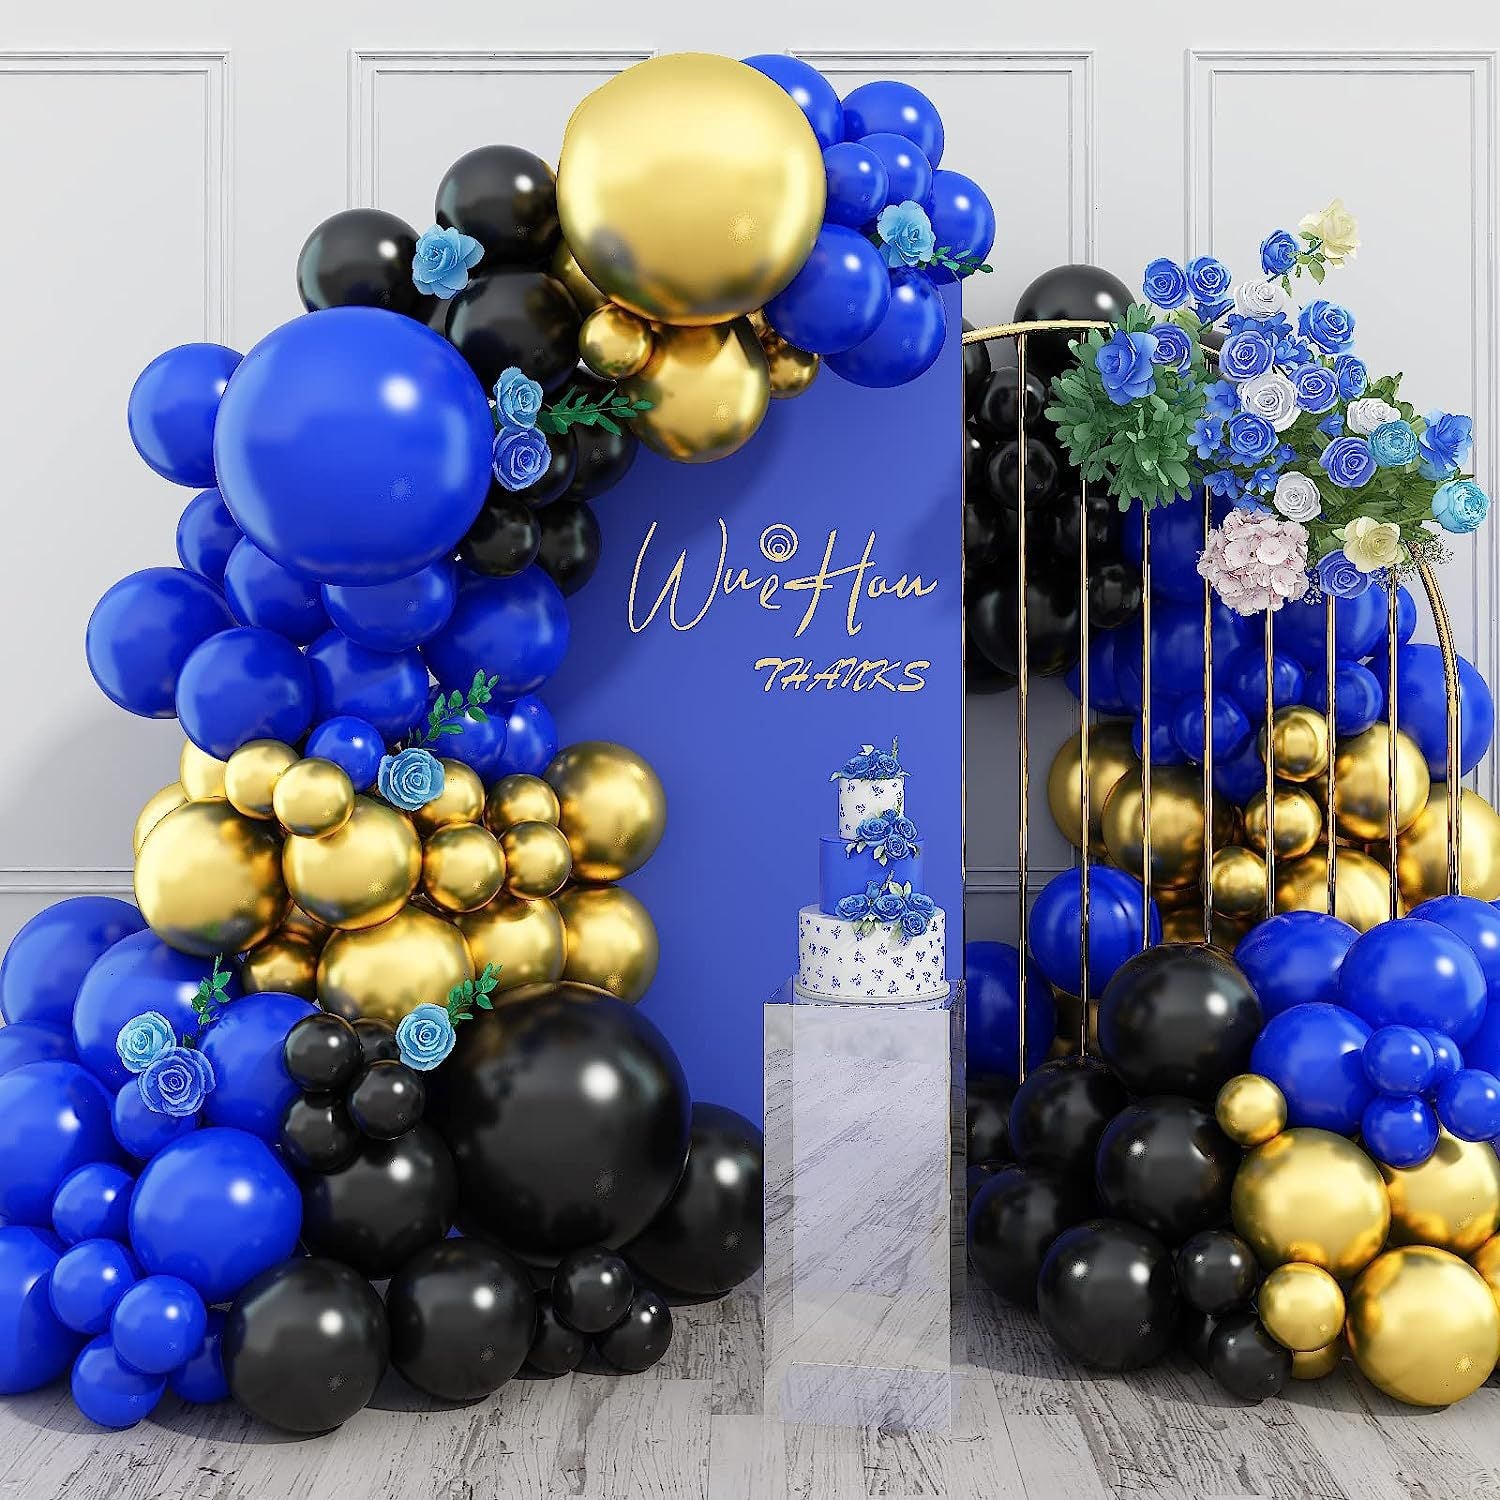 Black & Gold Balloon Garland  Black & Gold Party Decorations